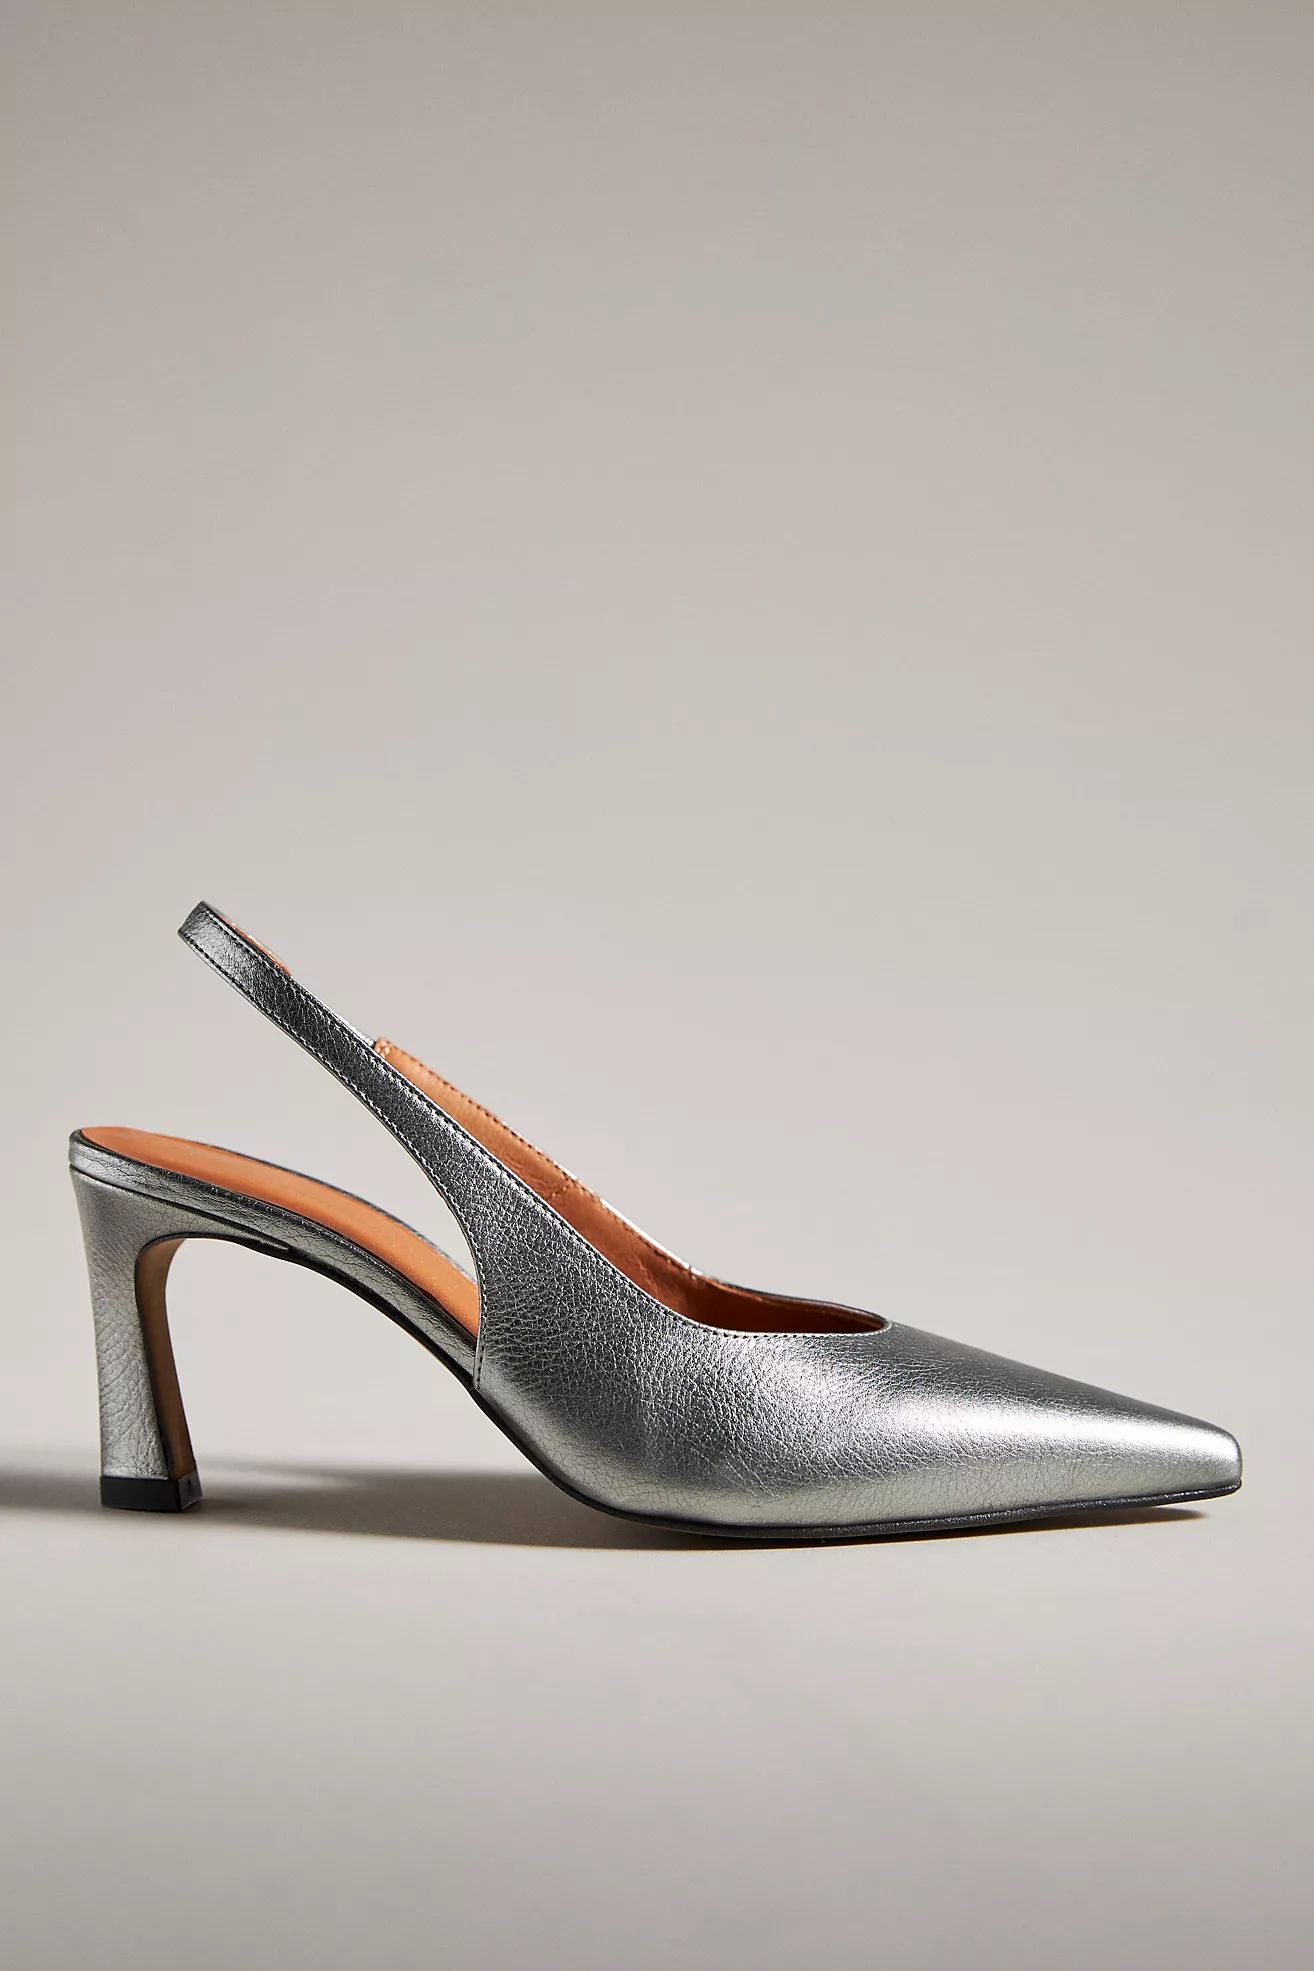 By Anthropologie Slingback Pumps | Anthropologie (US)